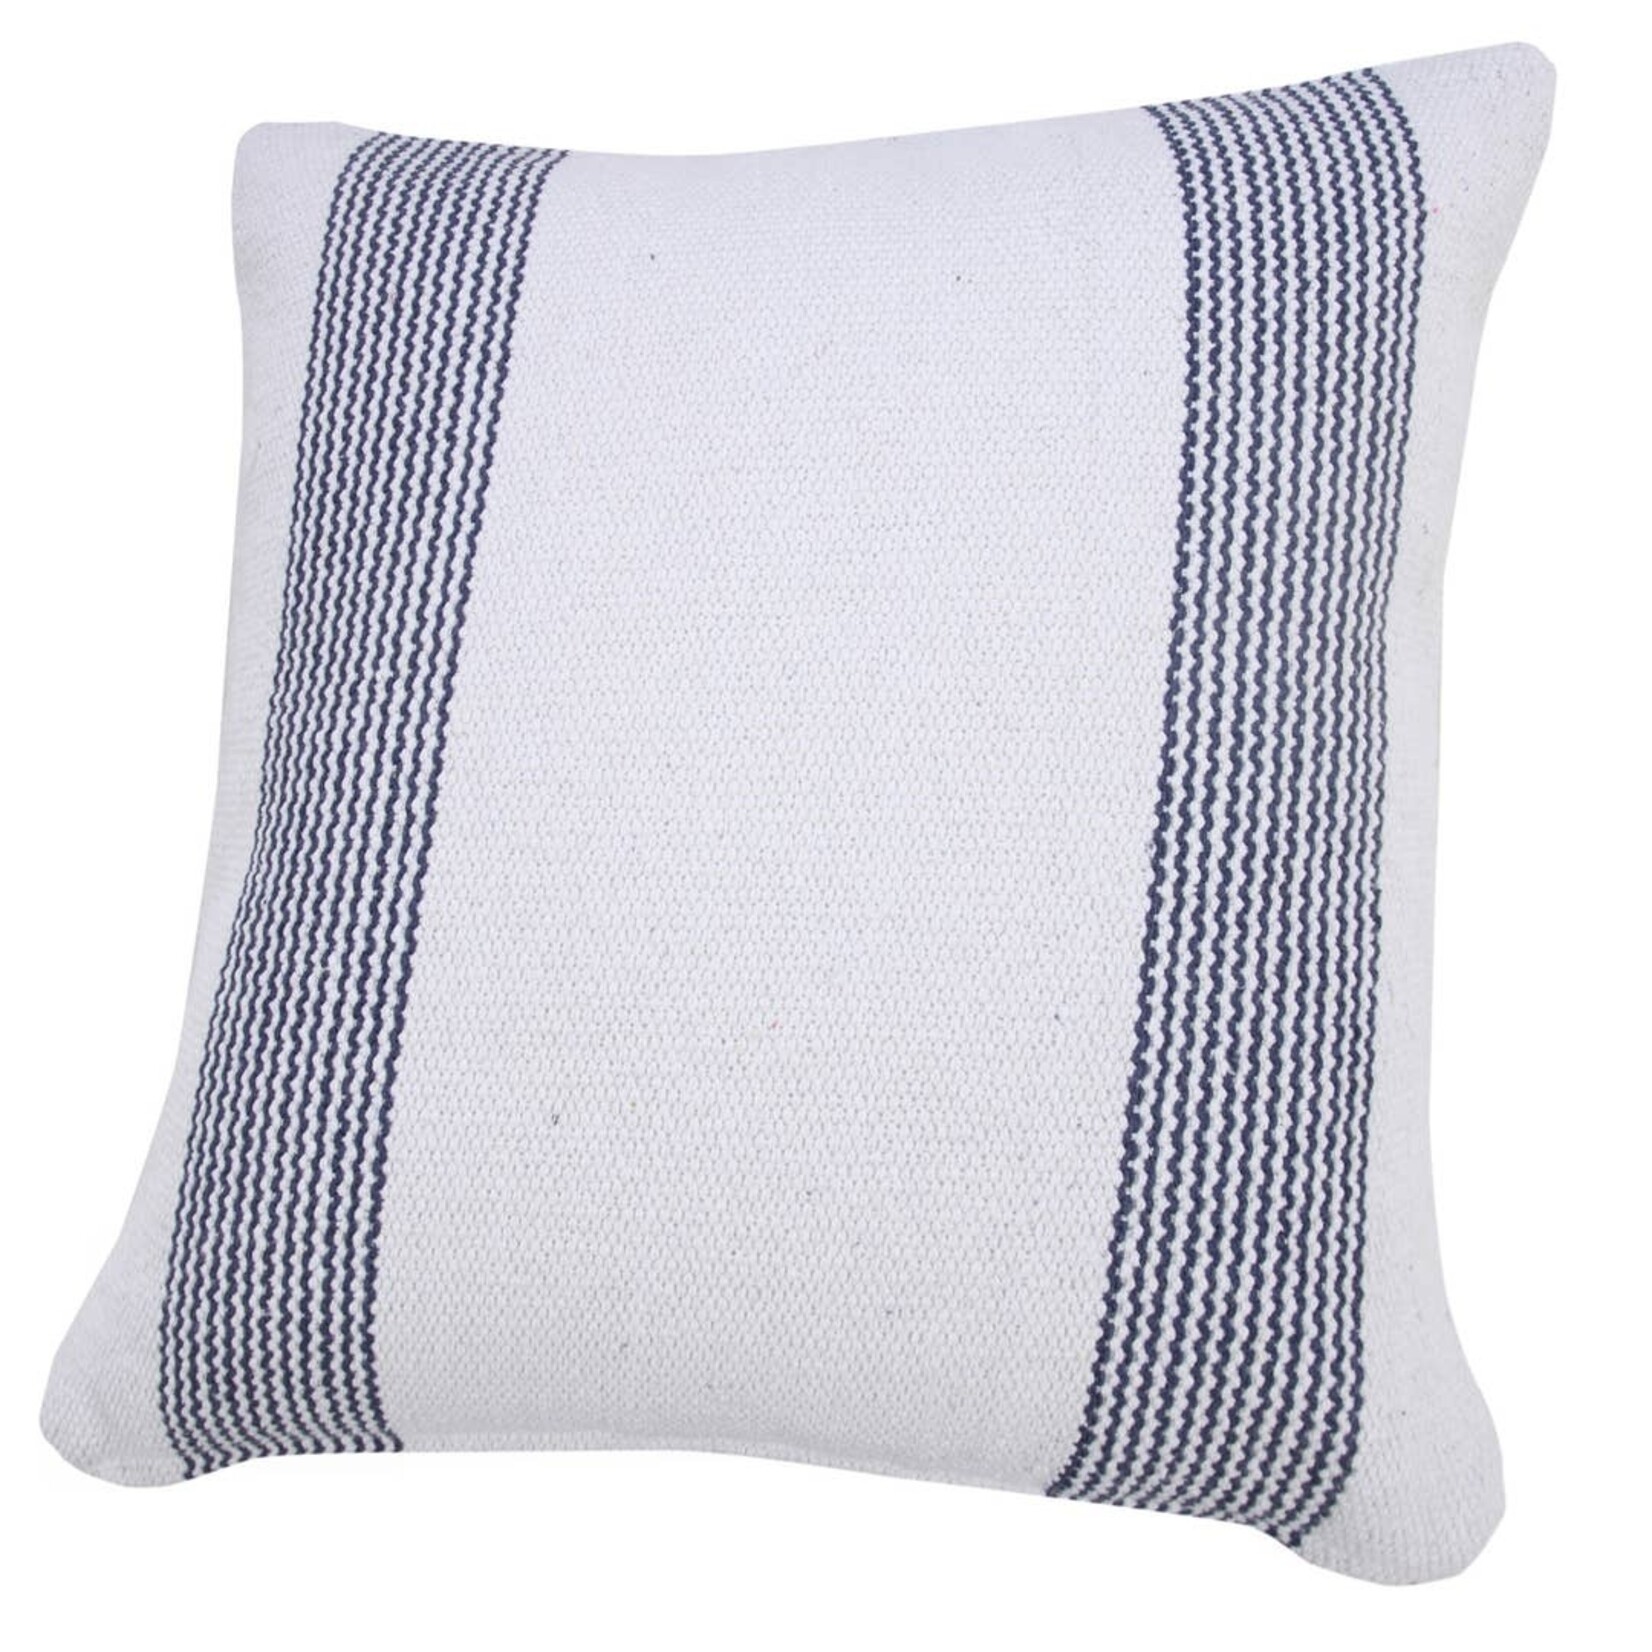 Pale Blue and White Geometric Striped Pillow 20" X 20"